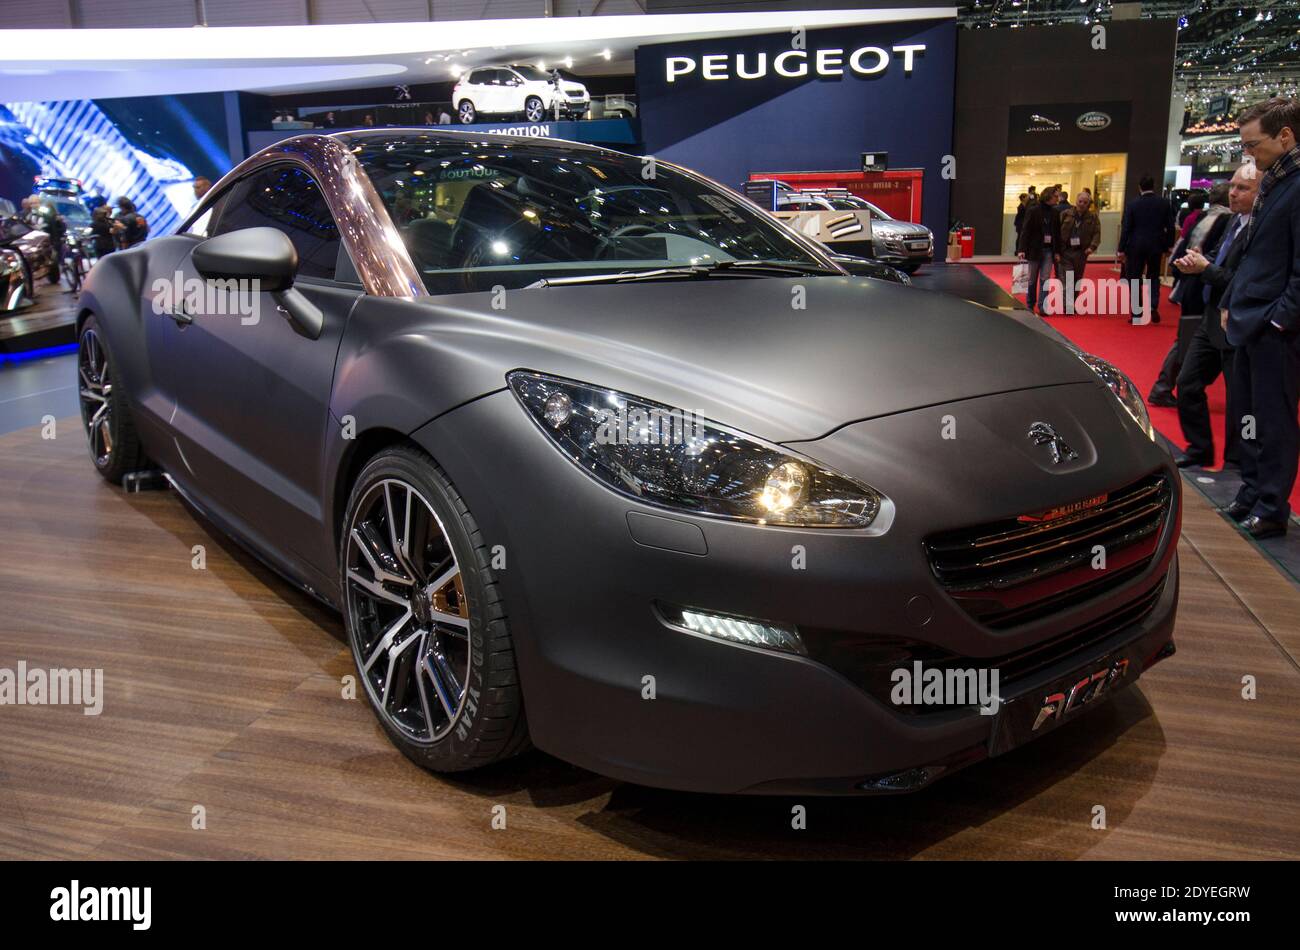 Concept Peugeot RCZ pictured during the 83rd International Geneva Motor  Show, in Geneva, Switzerland on March 6, 2013. Photo by Gilles  Bertrand/ABACAPRESS.COM Stock Photo - Alamy